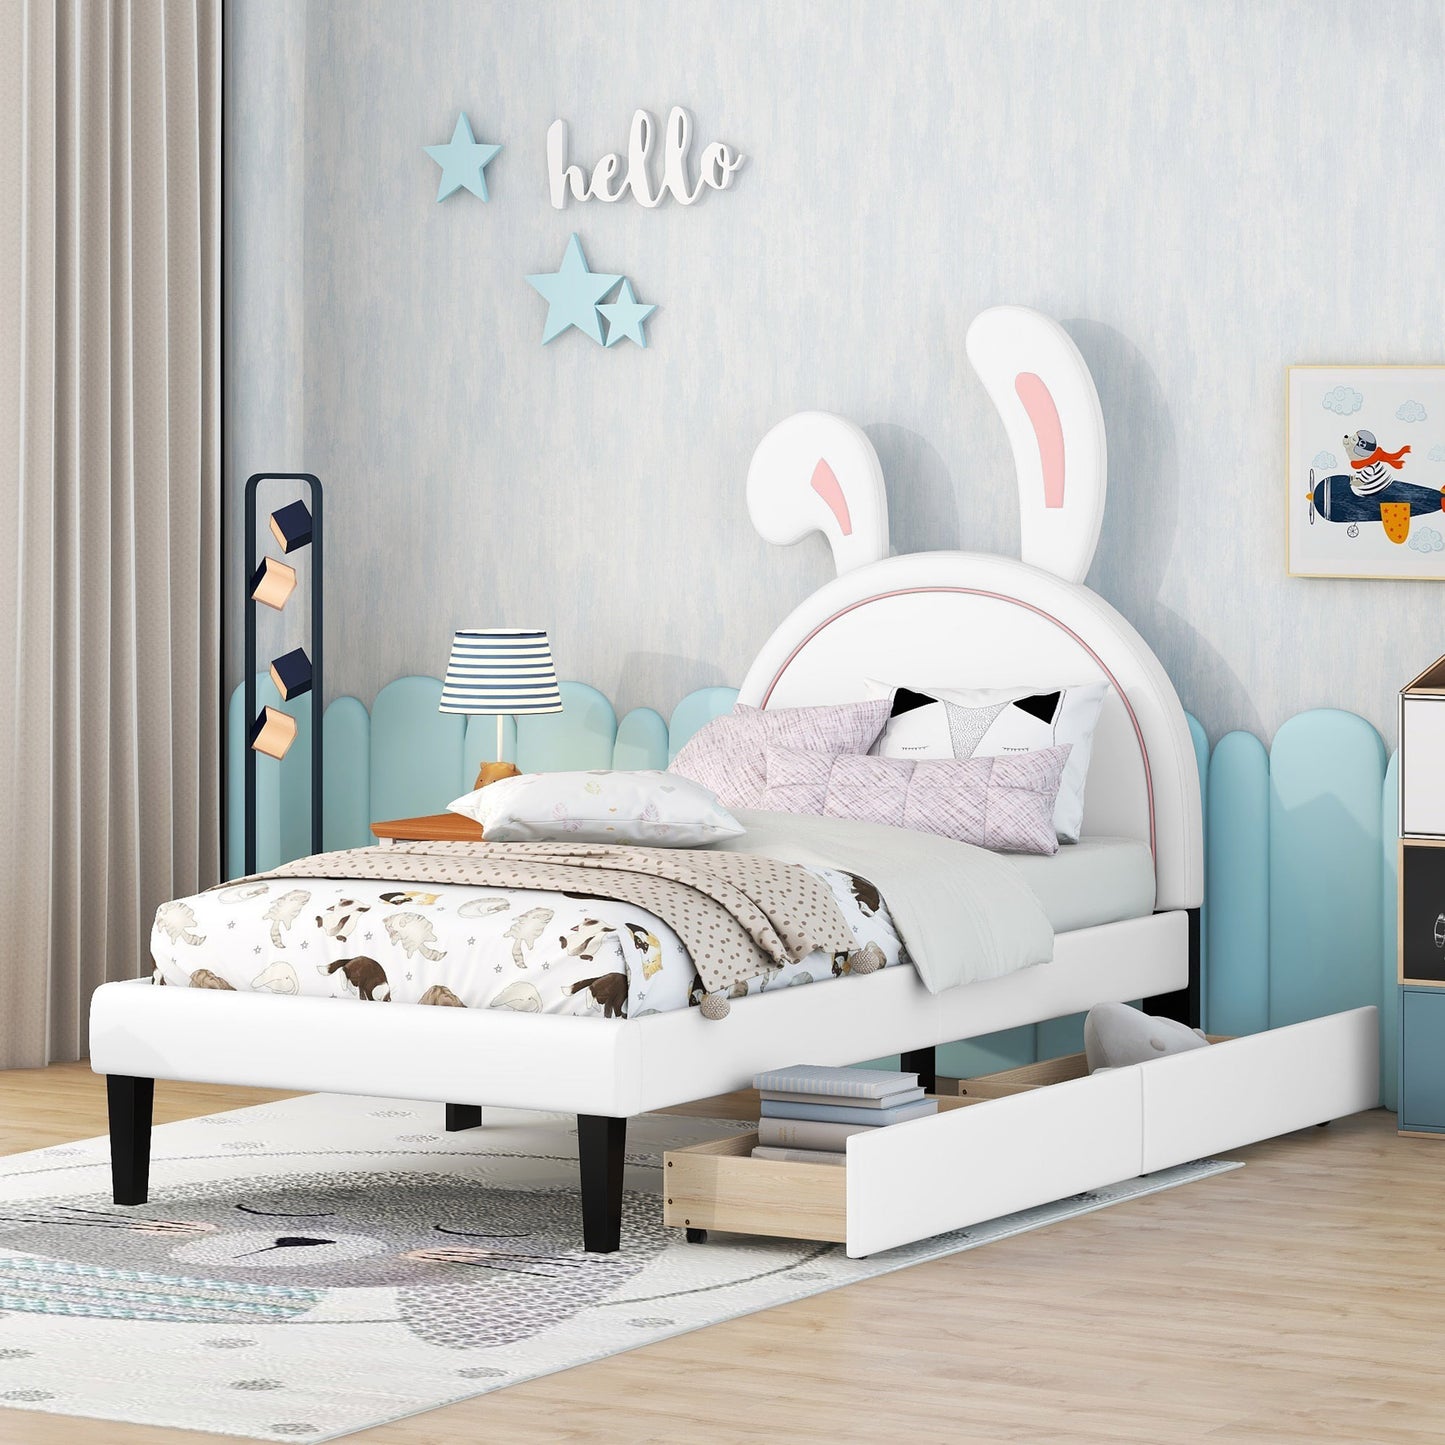 Twin Size Upholstered Leather Platform Bed with Rabbit Ornament and 2 Drawers, White